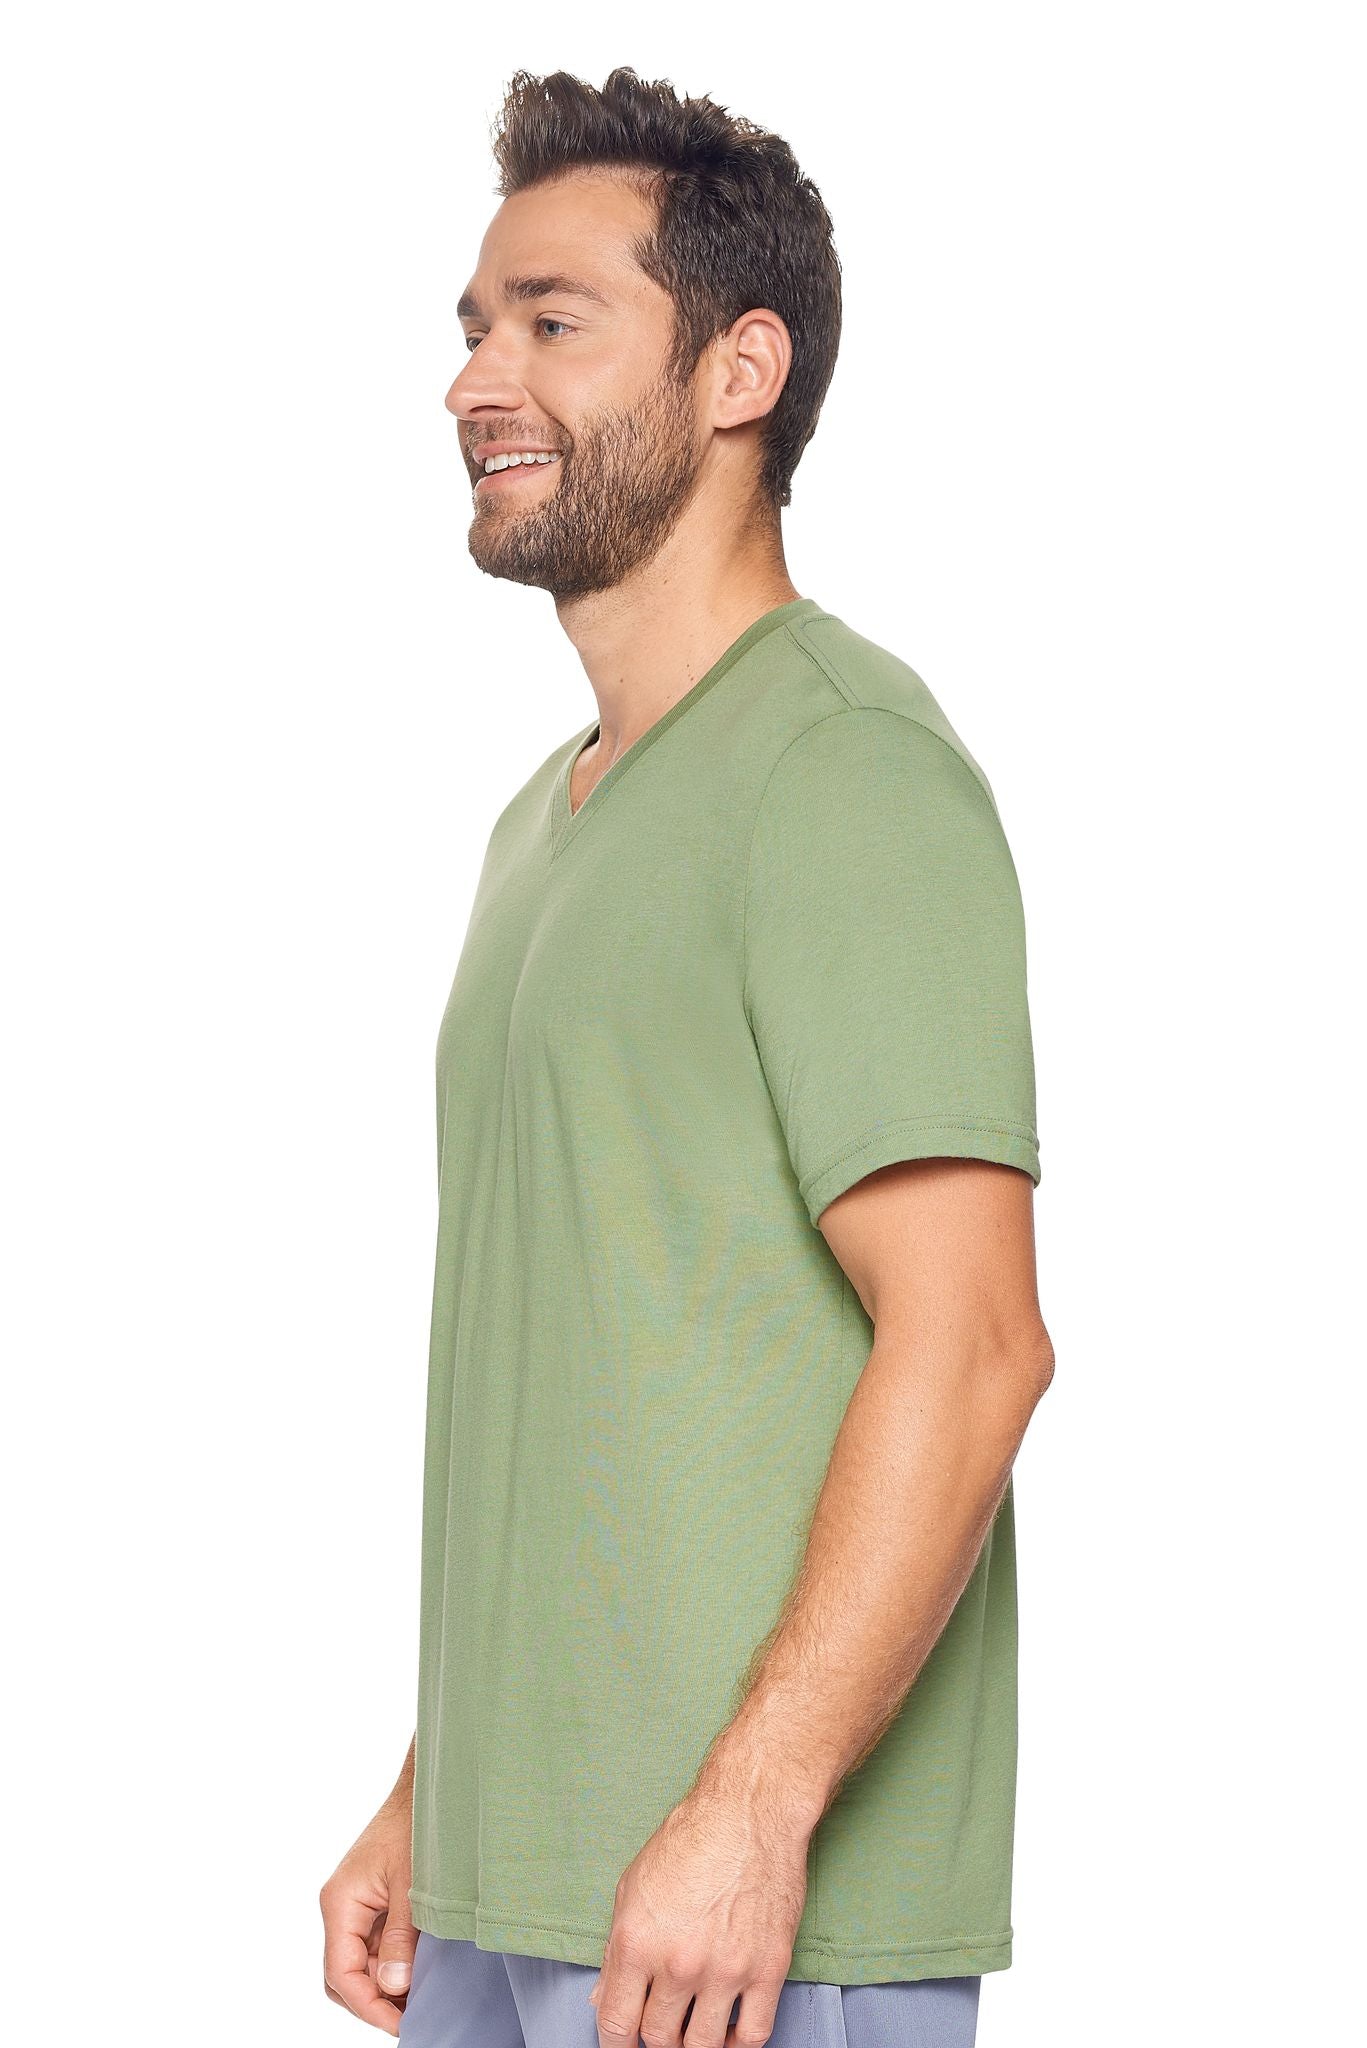 Expert Brand Wholesale Sustainable Eco-Friendly Apparel Micromodal Cotton Men's V-neck T-Shirt Made in USA meadow green 2#meadow